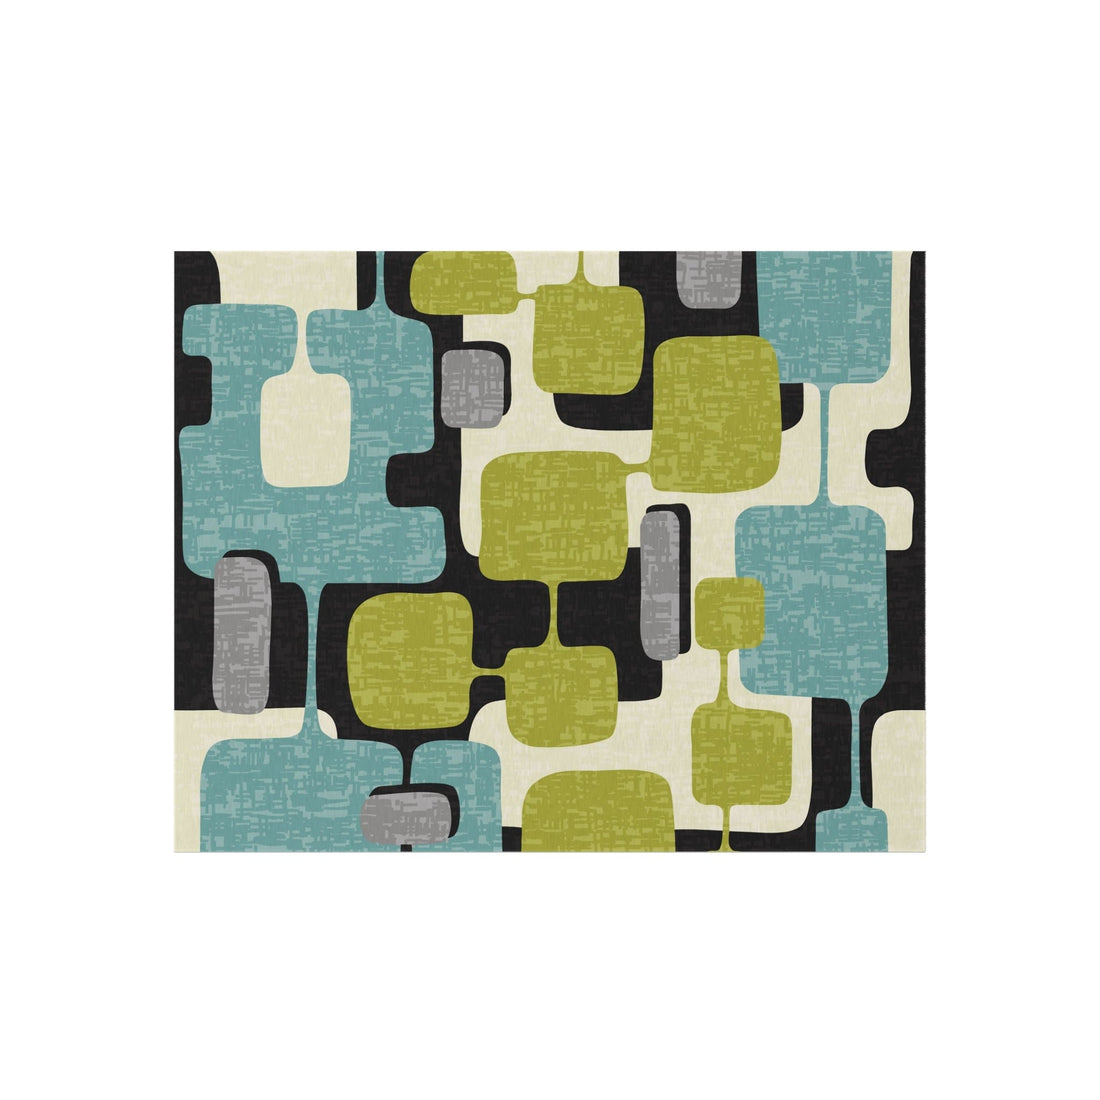 Kate McEnroe New York Retro Mid Century Modern Indoor - Outdoor Area Rug, MCM Teal, Lime Green, Gray, Cream Geometric Abstract Porch Patio Accent RugRugs11965609496230088632